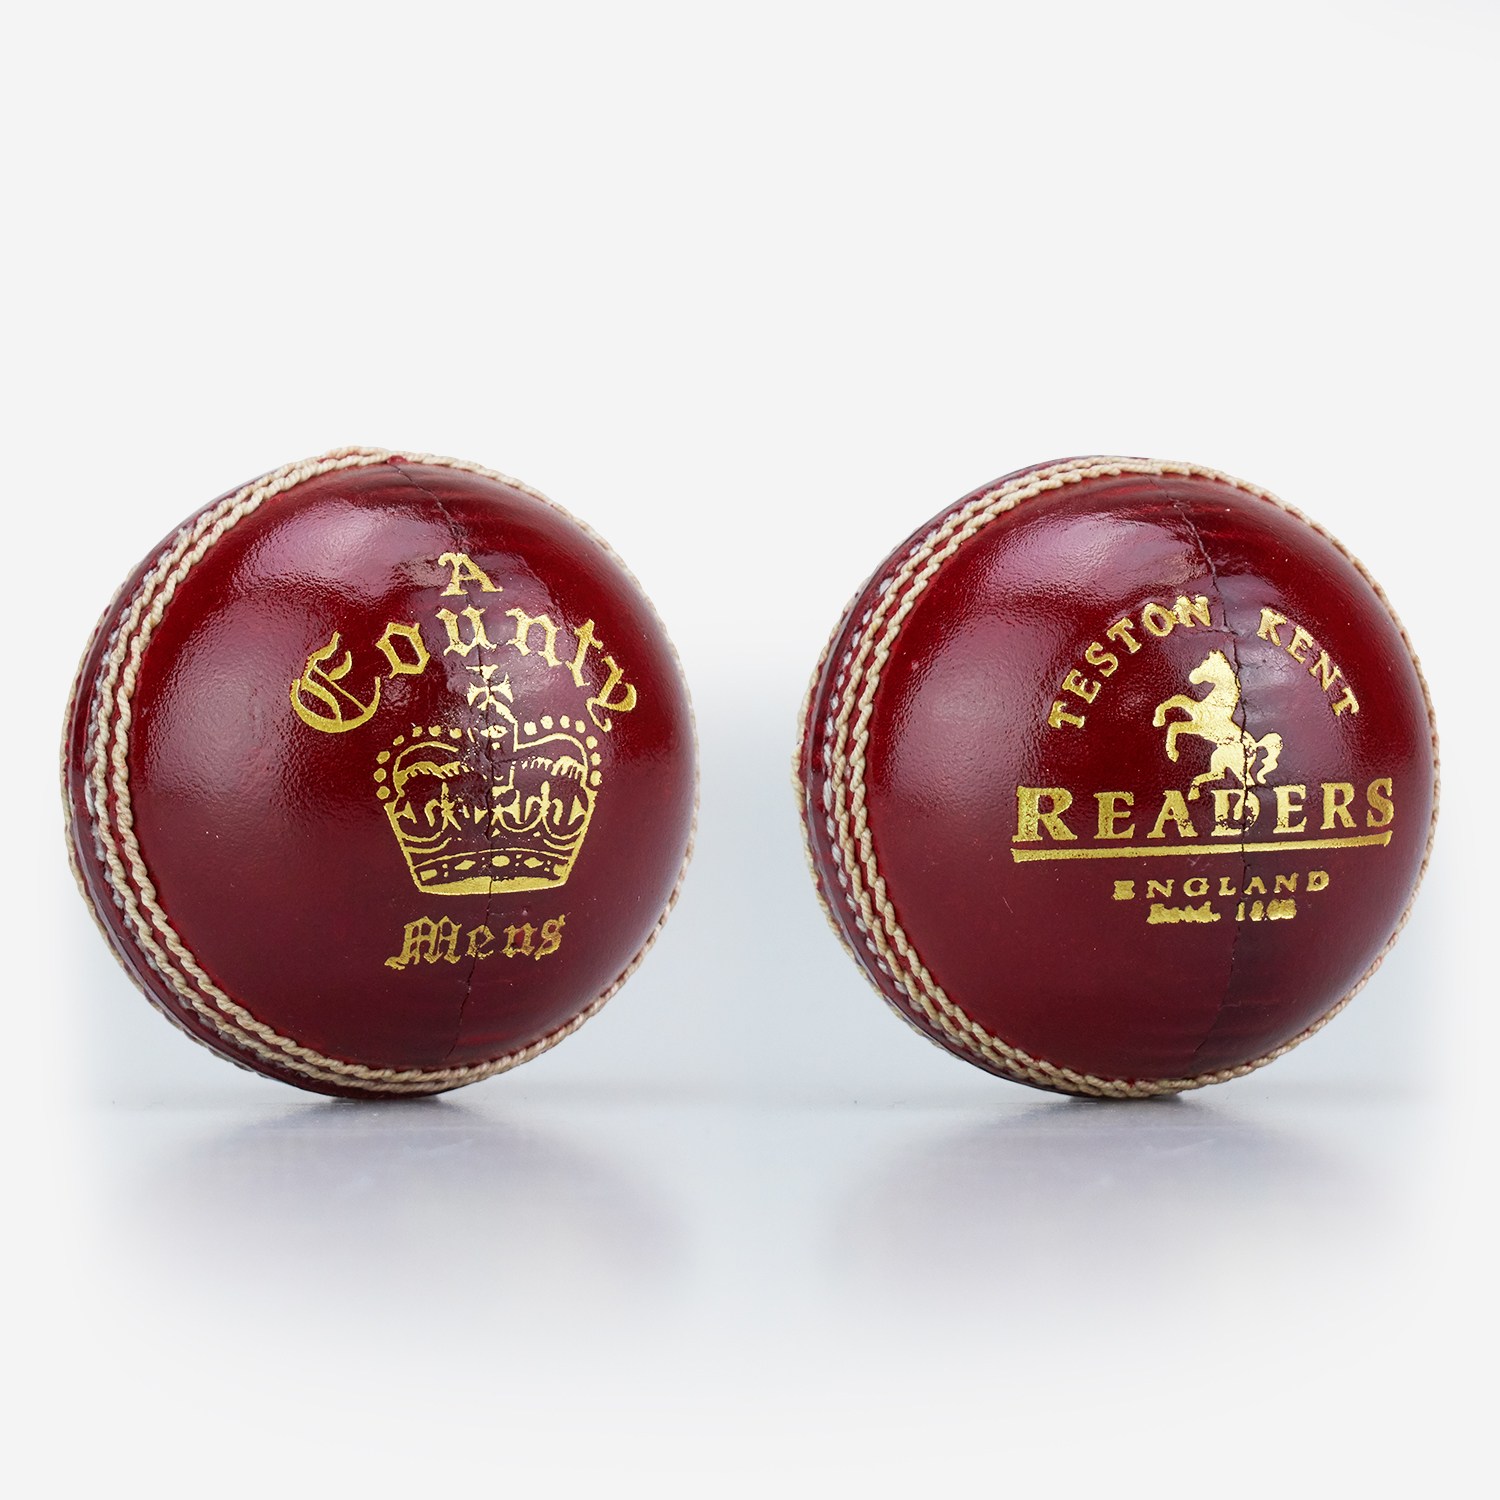 Pink Readers County Crown Cricket ball 